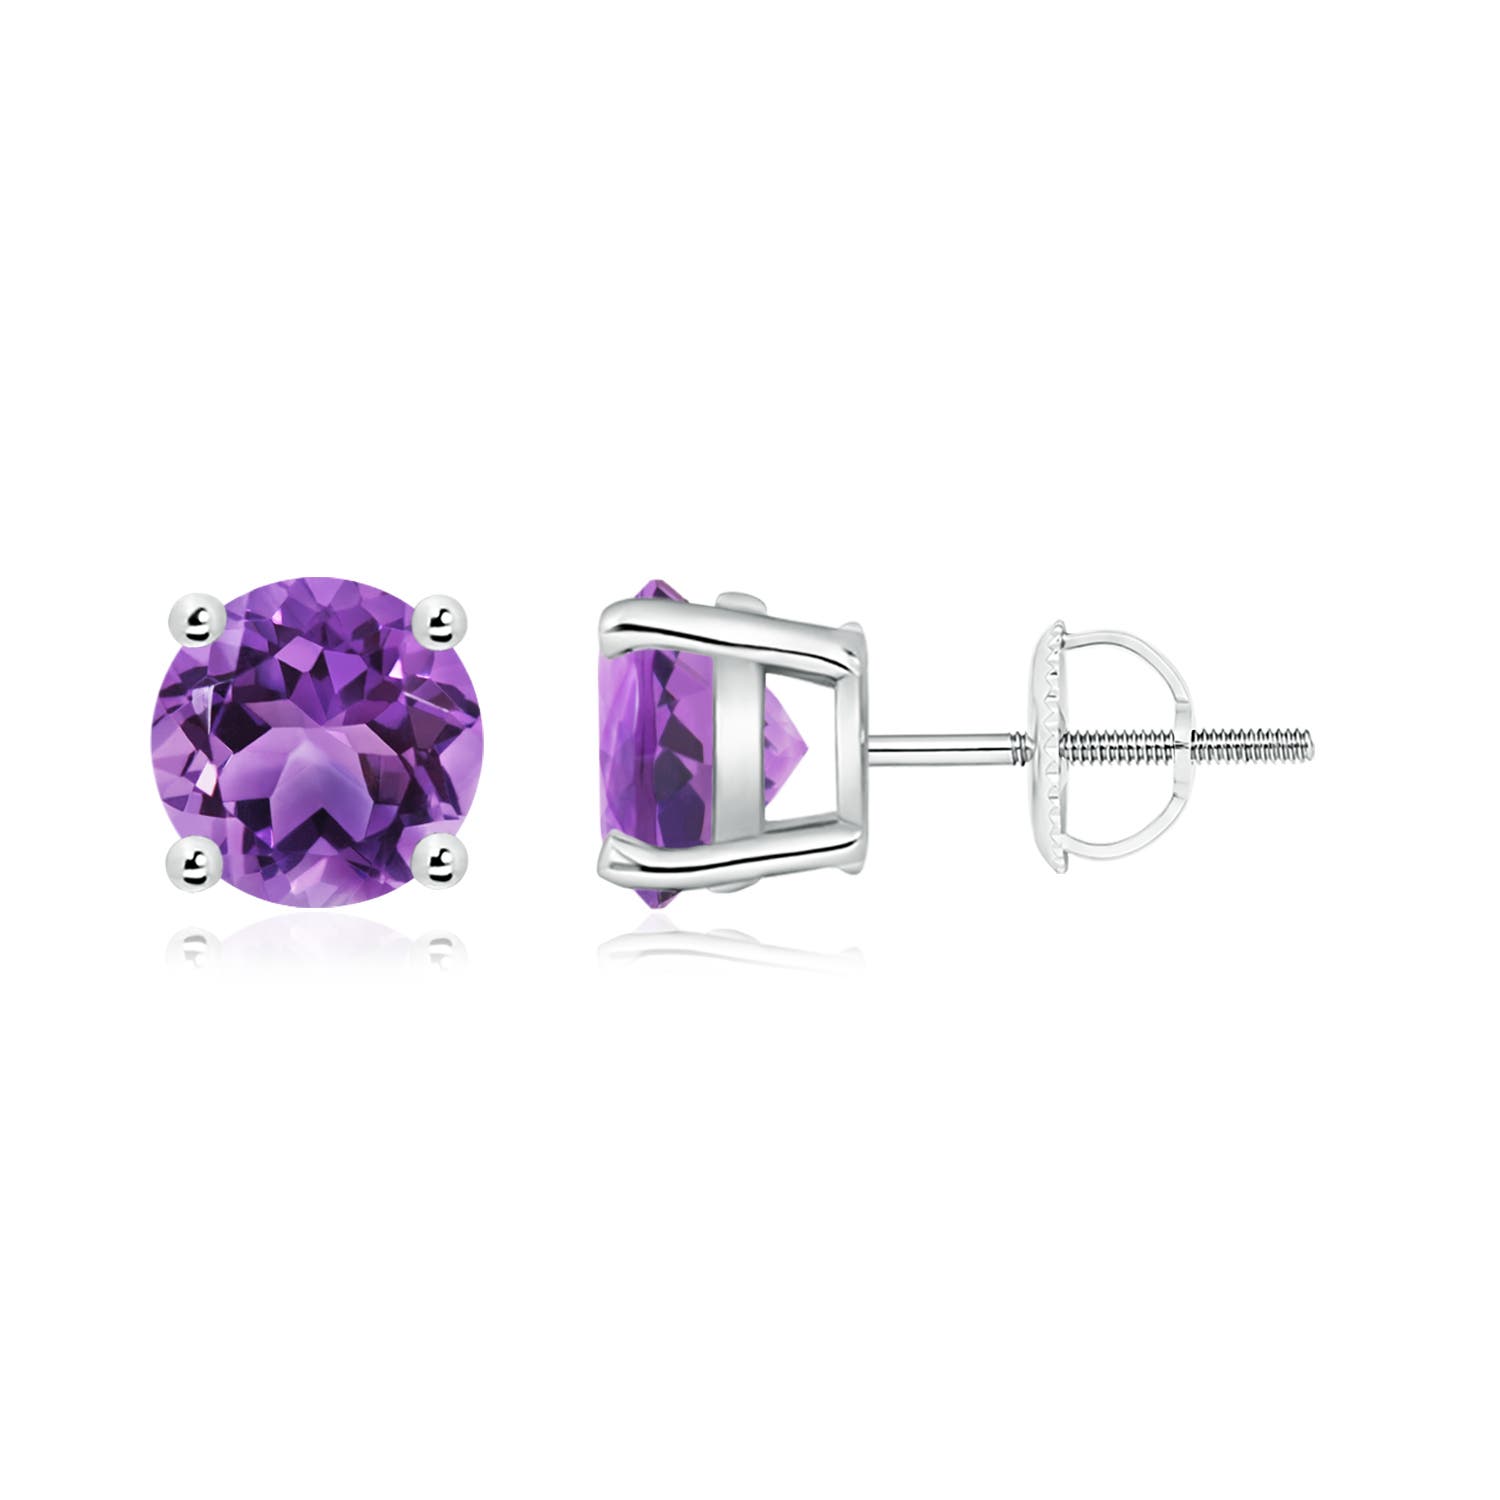 AA - Amethyst / 2.3 CT / 14 KT White Gold